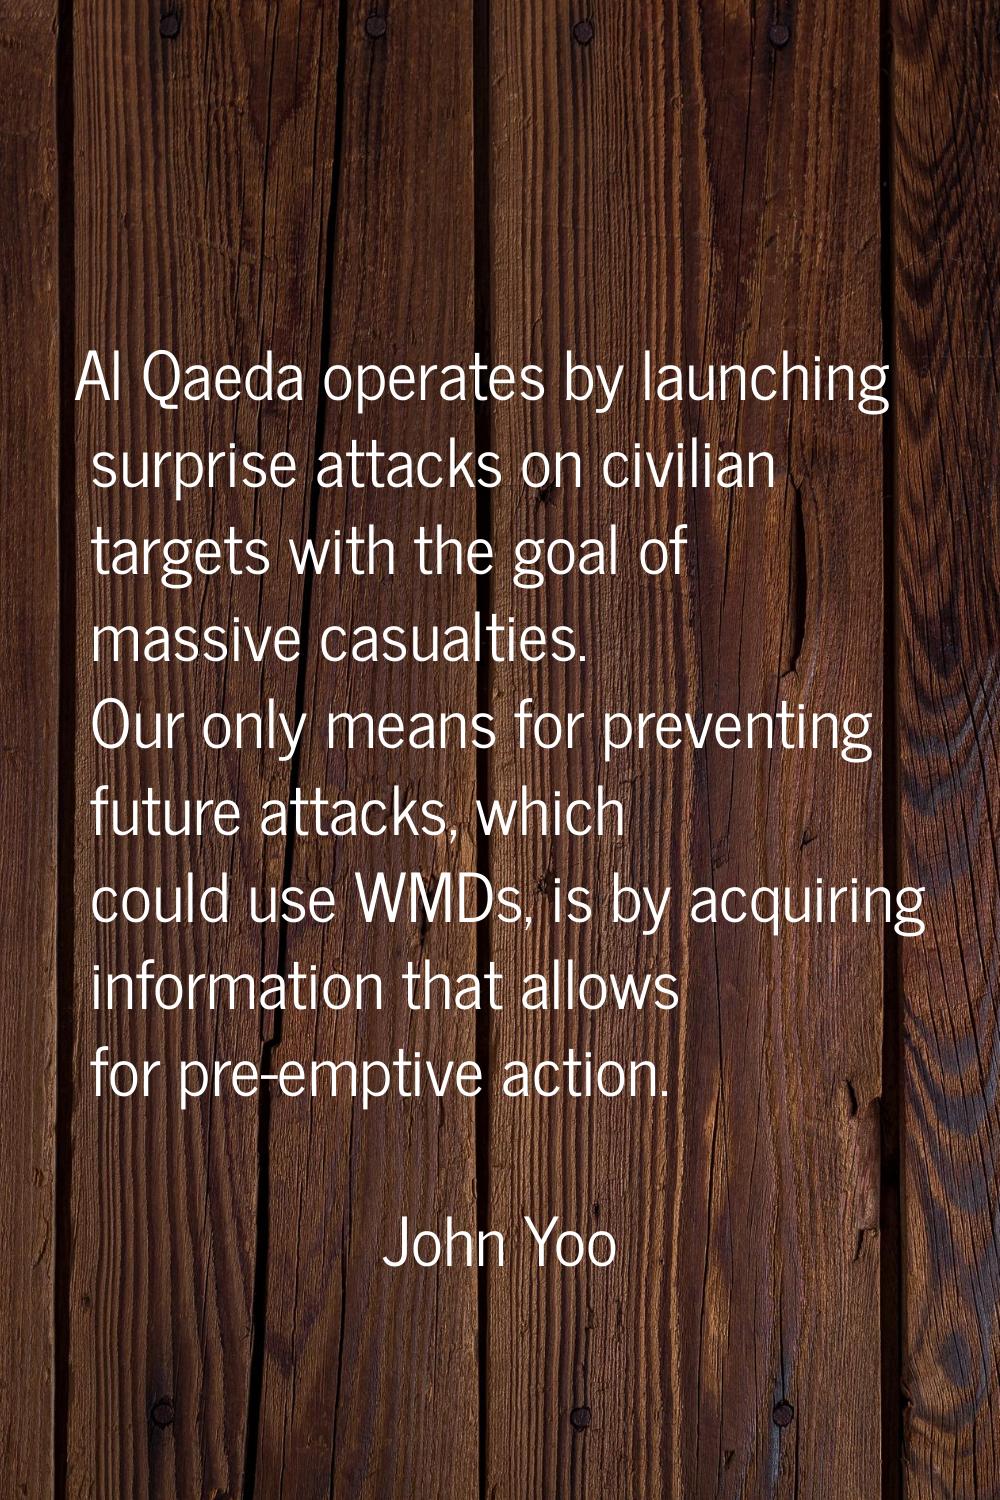 Al Qaeda operates by launching surprise attacks on civilian targets with the goal of massive casual